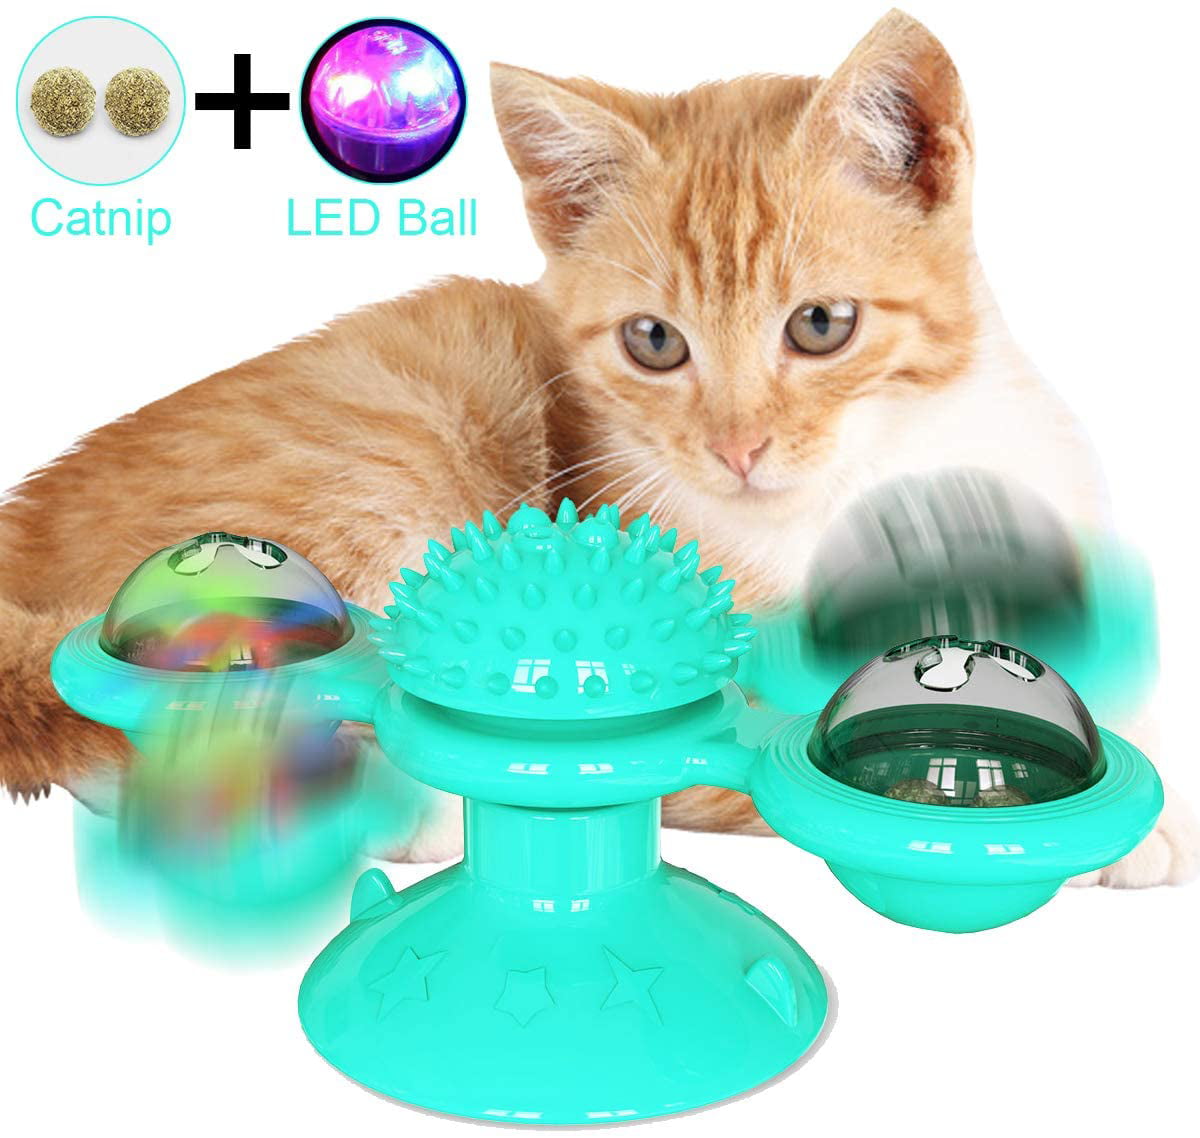 PeSandy Turntable Windmill Cat Toy with Suction Cup Interactive Cat Teasing Toy Multi-functional Cat Toothbrush Toy with Catnips and Bells for Cats/Kitten Scratching Tickle Massage Hair Brush